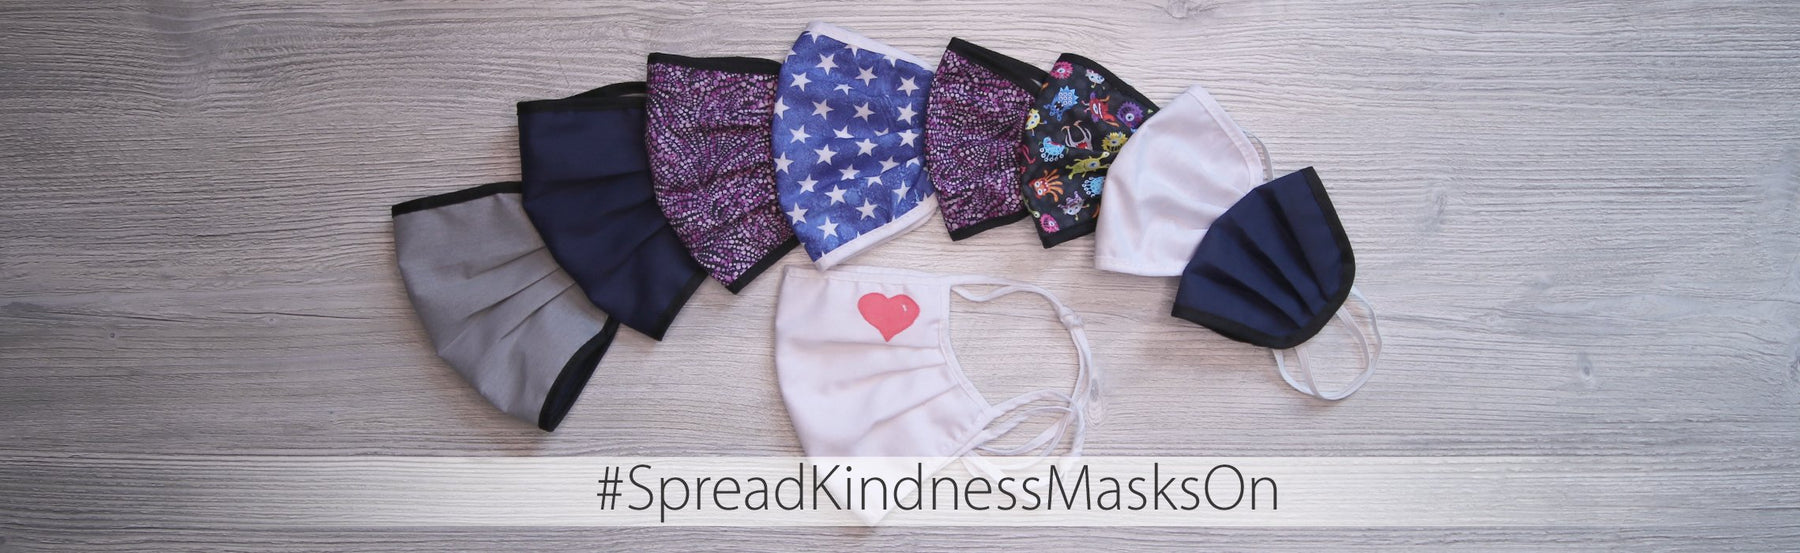 How We Talk About Masks Makes a Difference